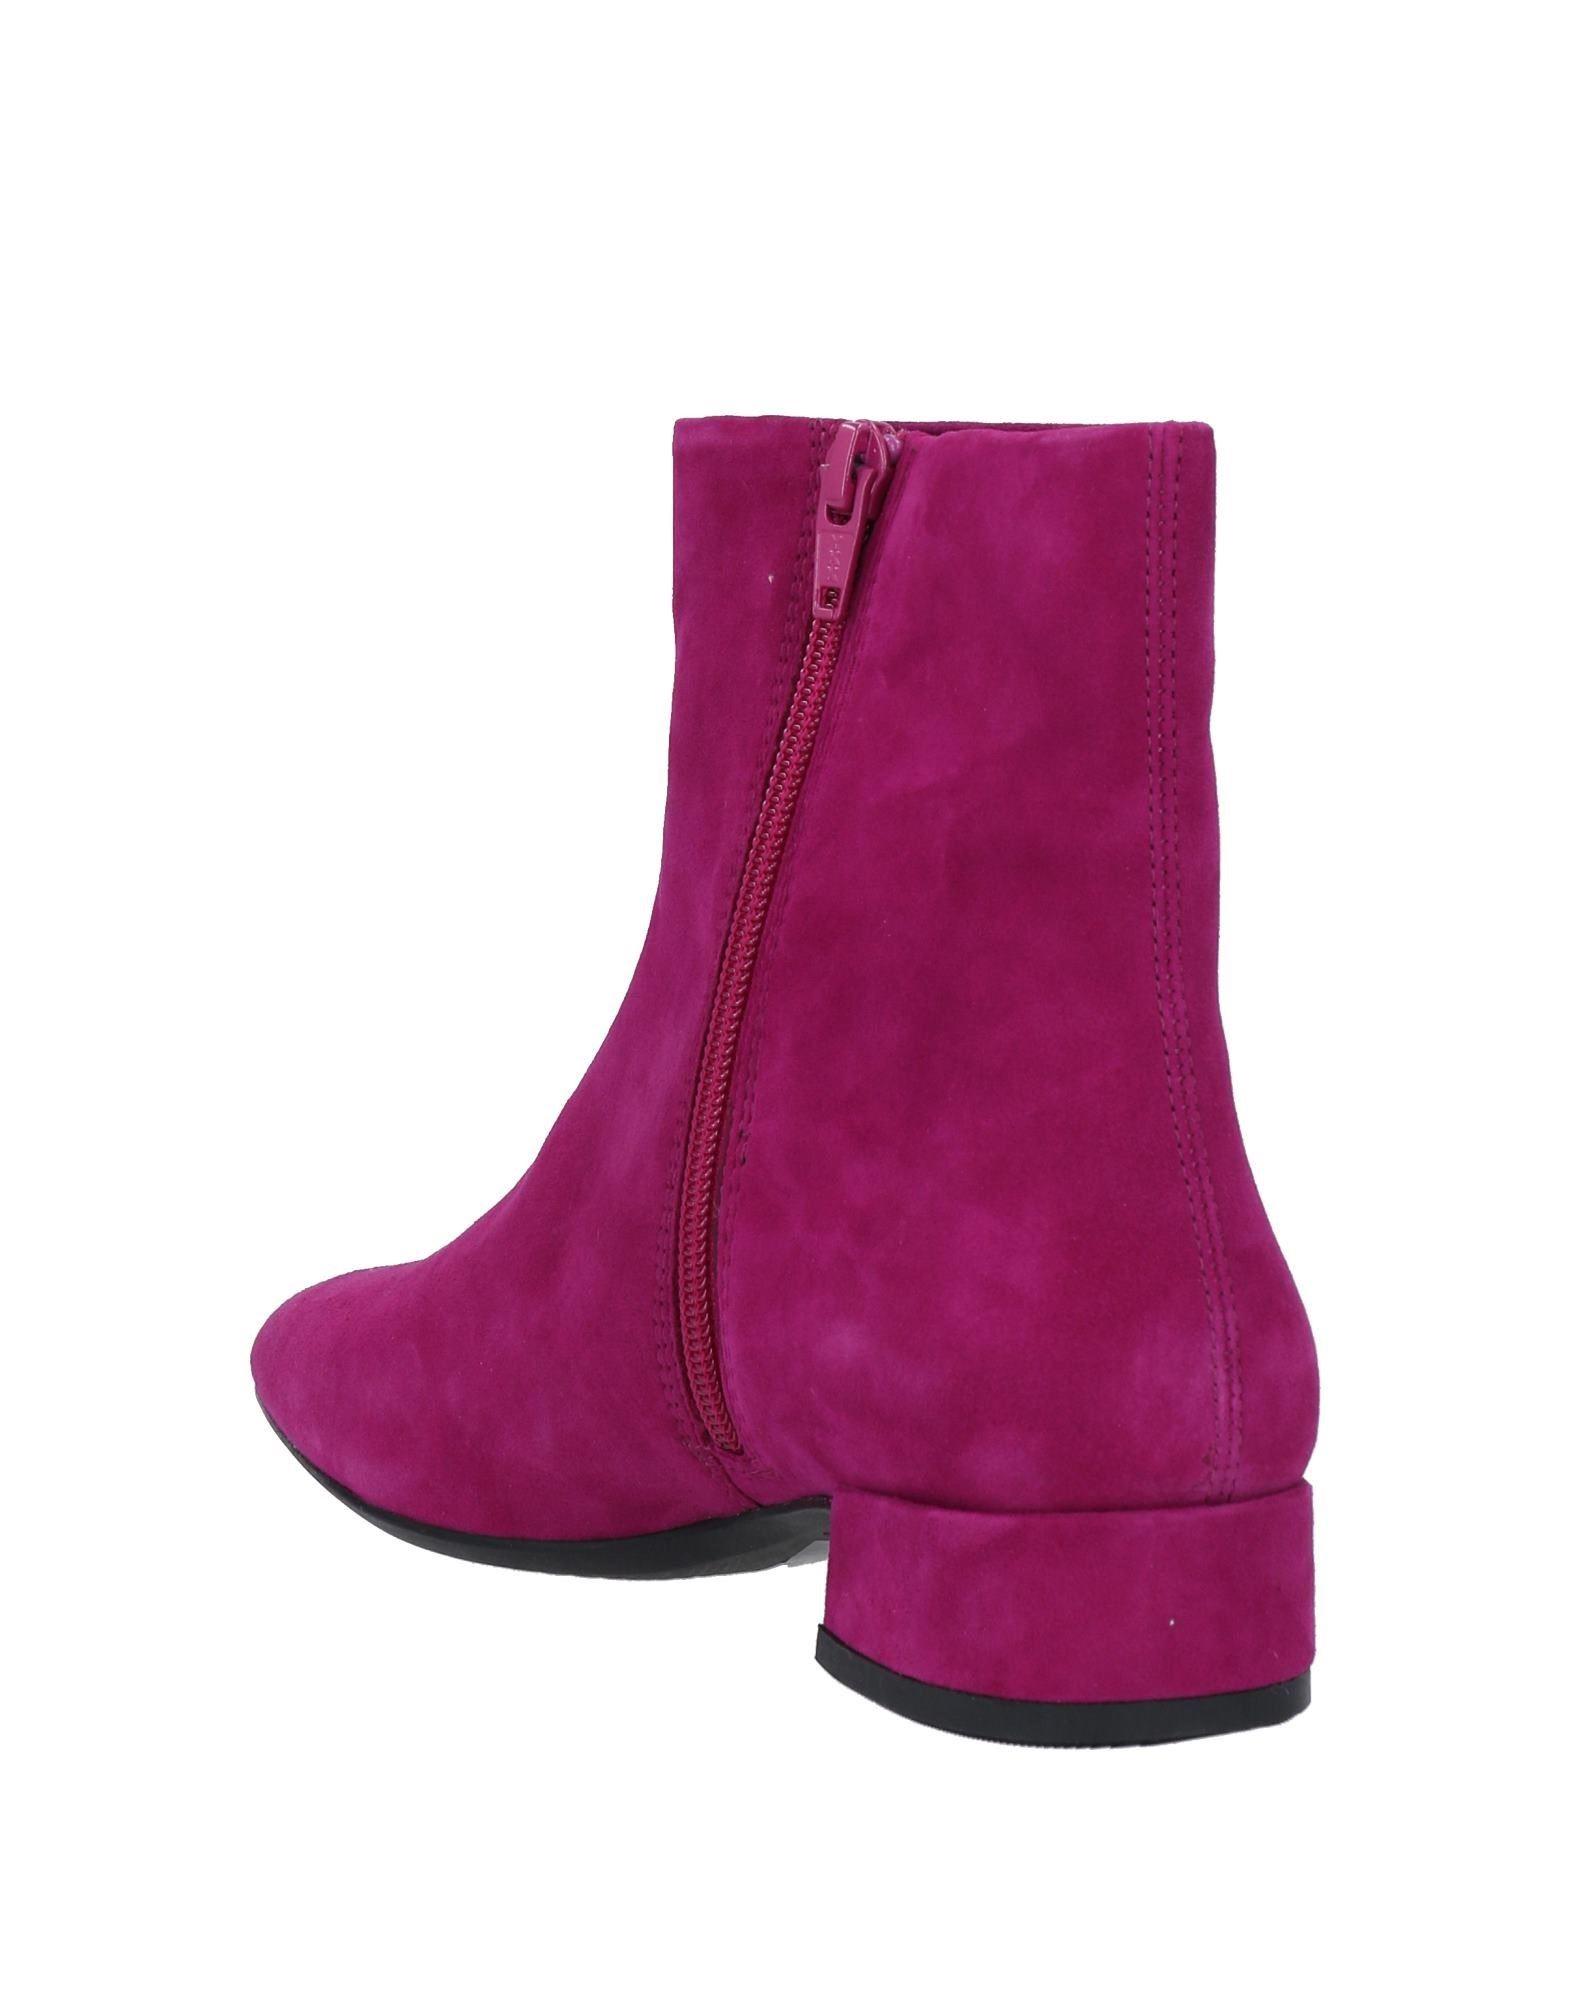 Vagabond Shoemakers Suede Ankle Boots in Fuchsia (Purple) | Lyst